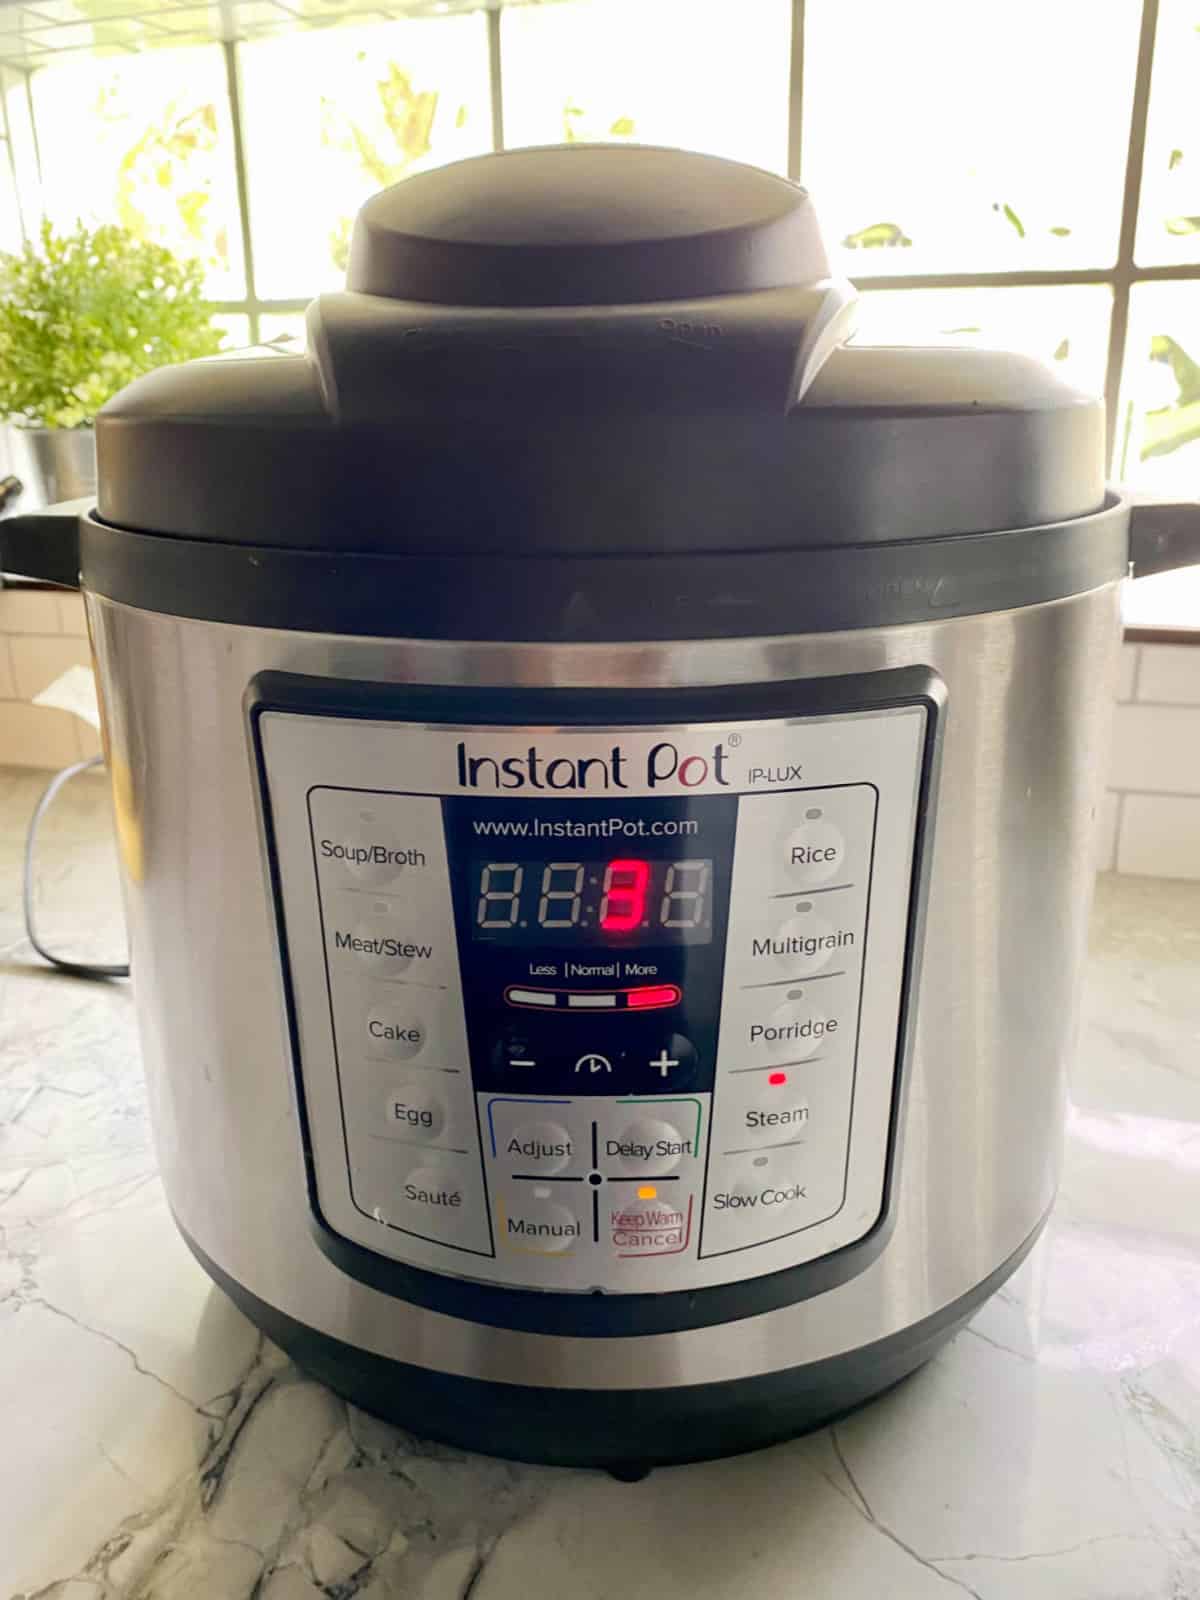 Stainless Steel Instant Pot on marble counter.